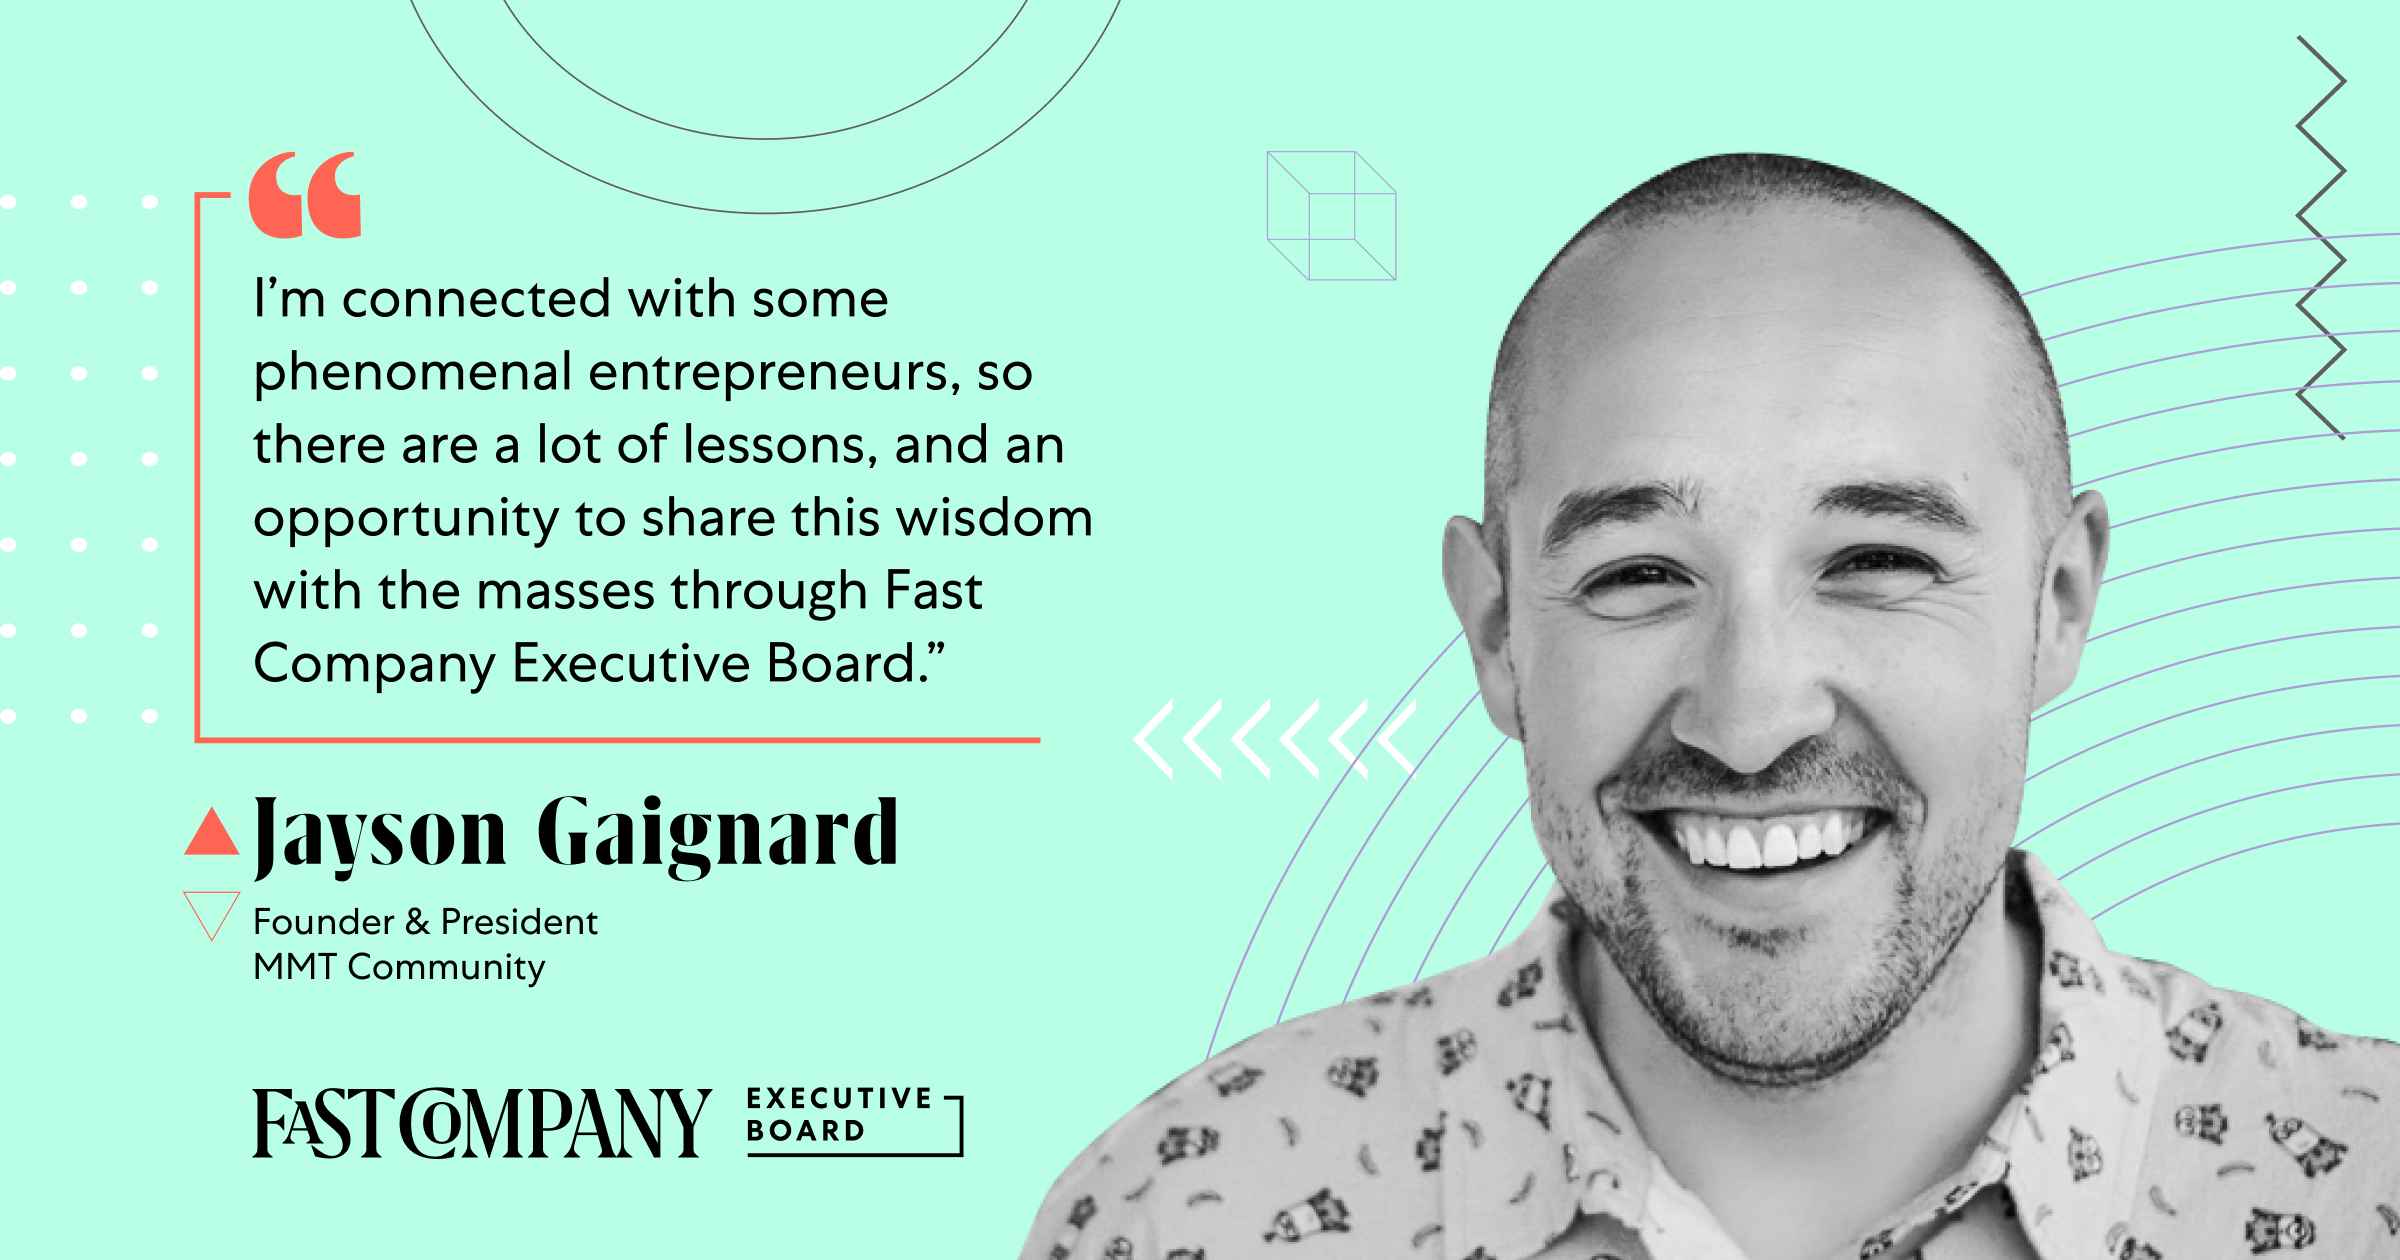 Jayson Gaignard To Share Wisdom From His Online Community Through Fast Company Executive Board